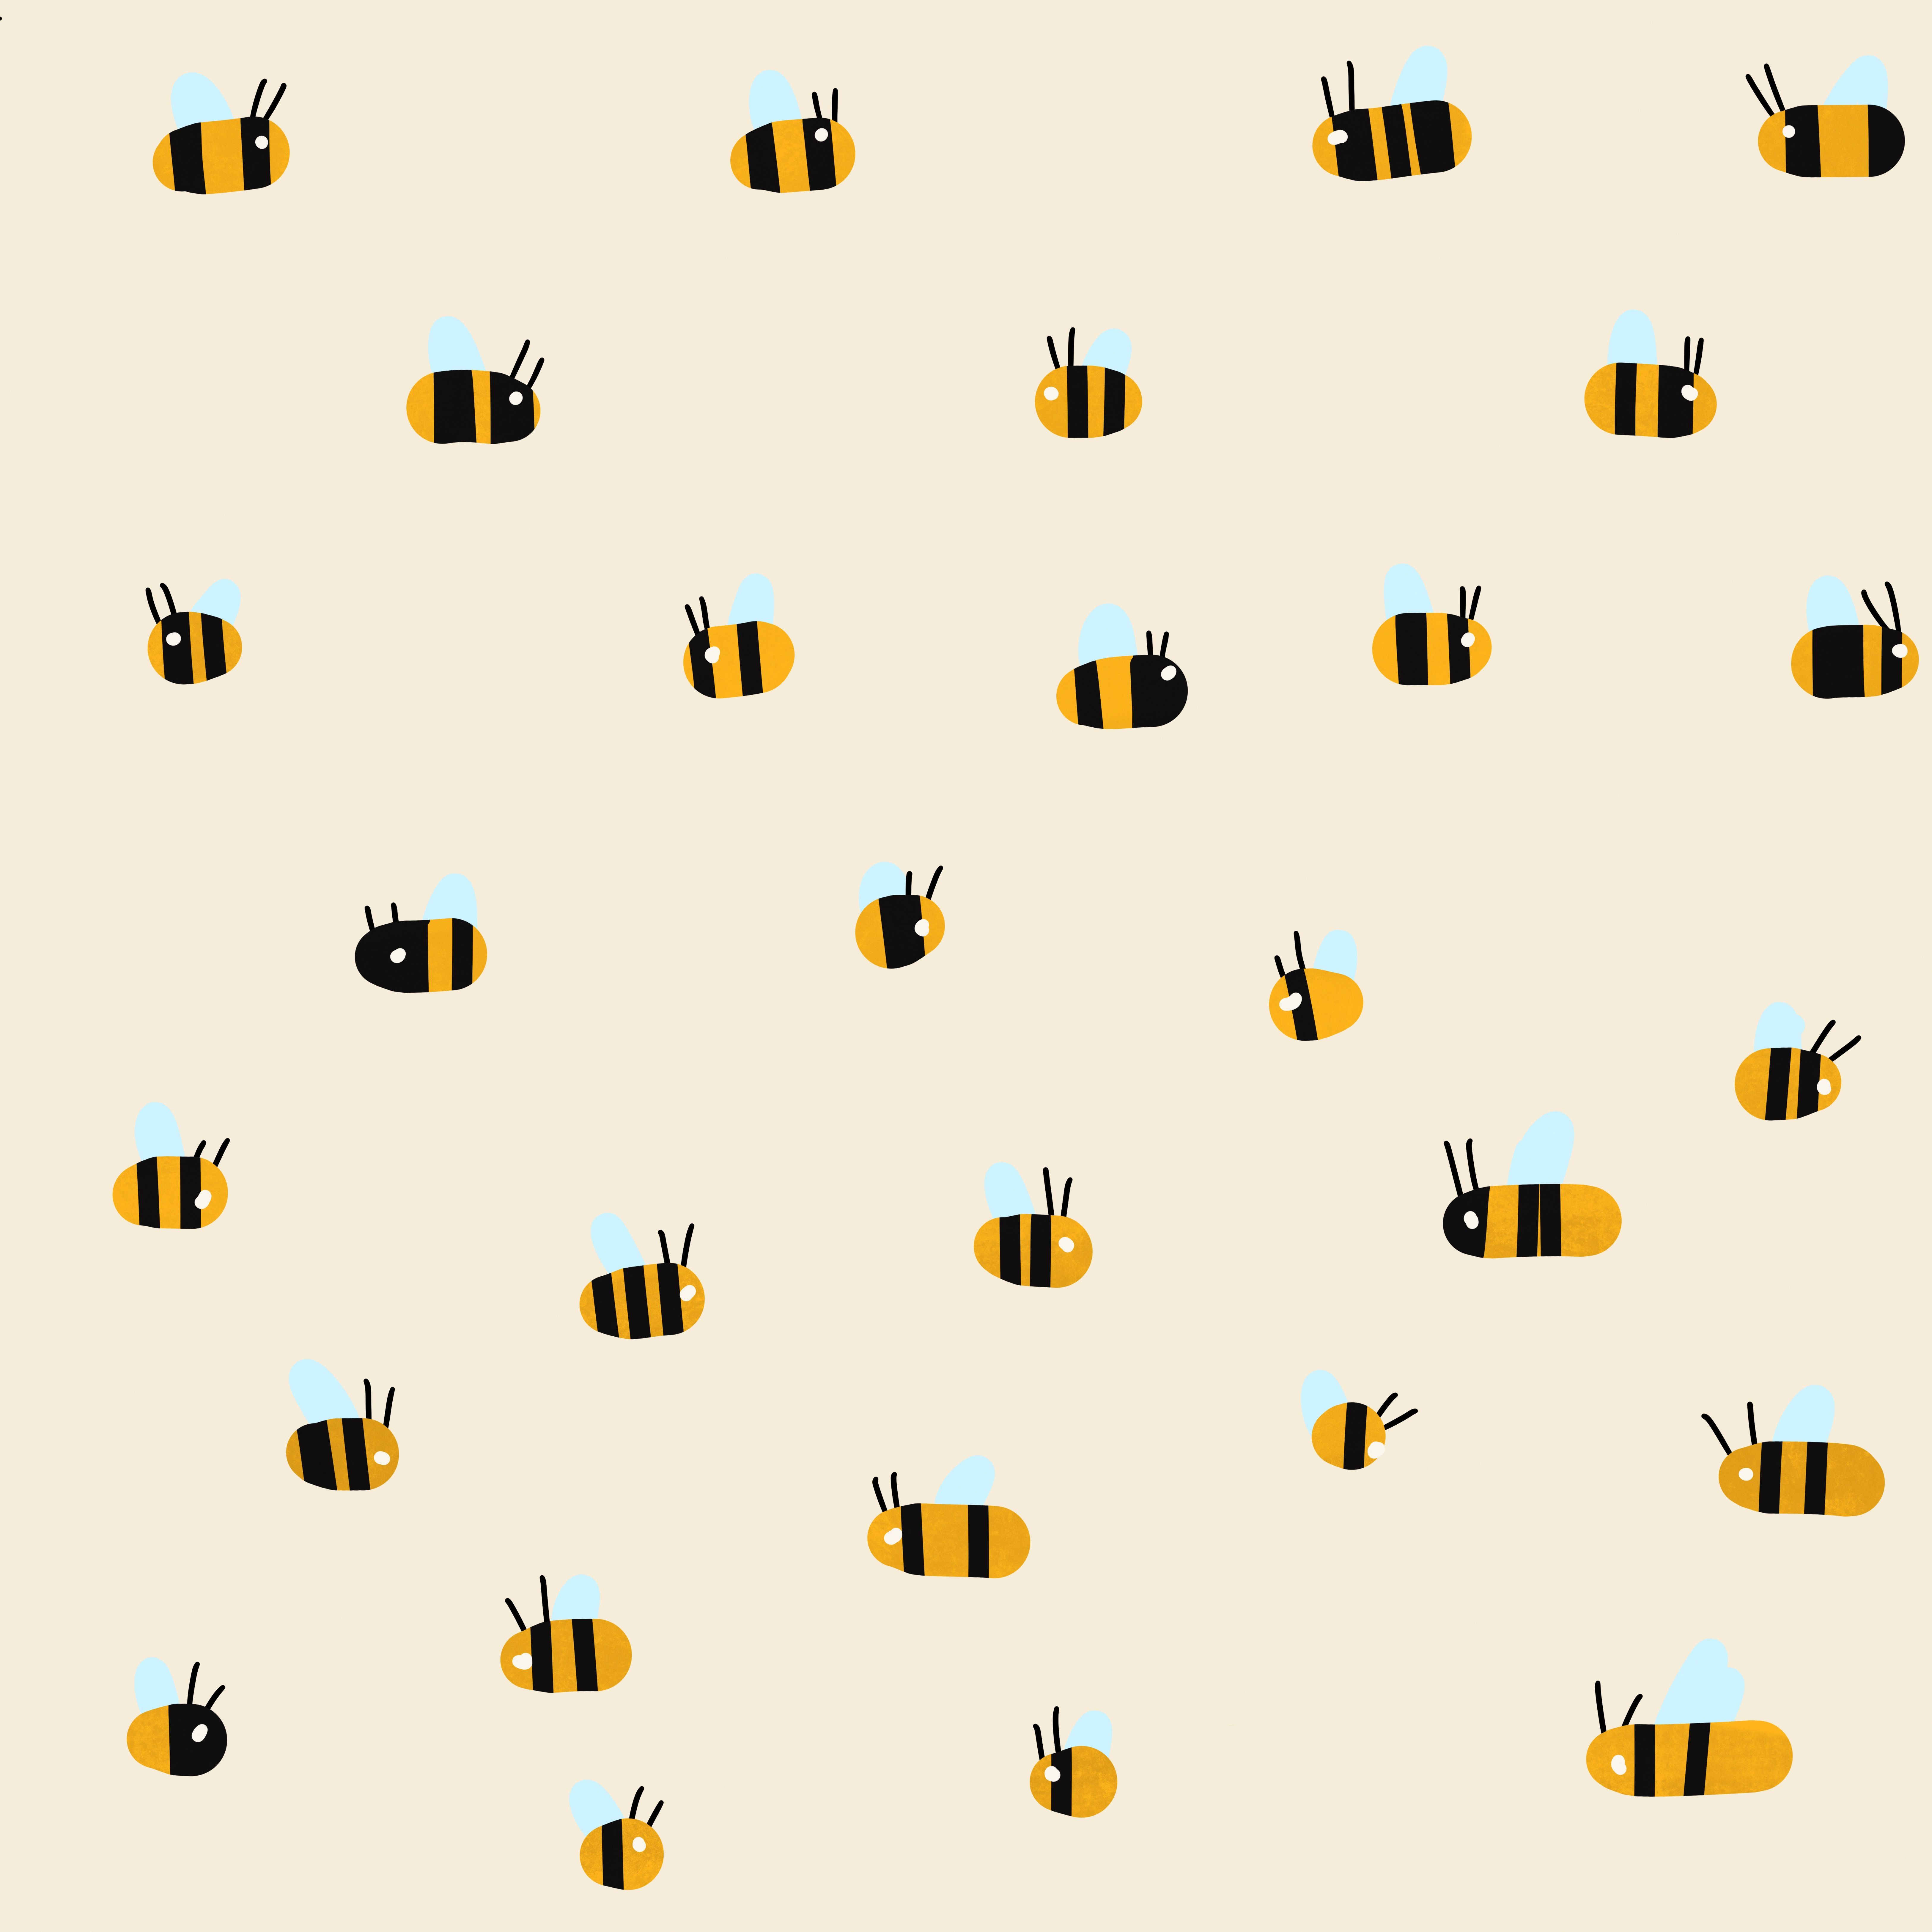 Aesthetic Bees Wallpapers